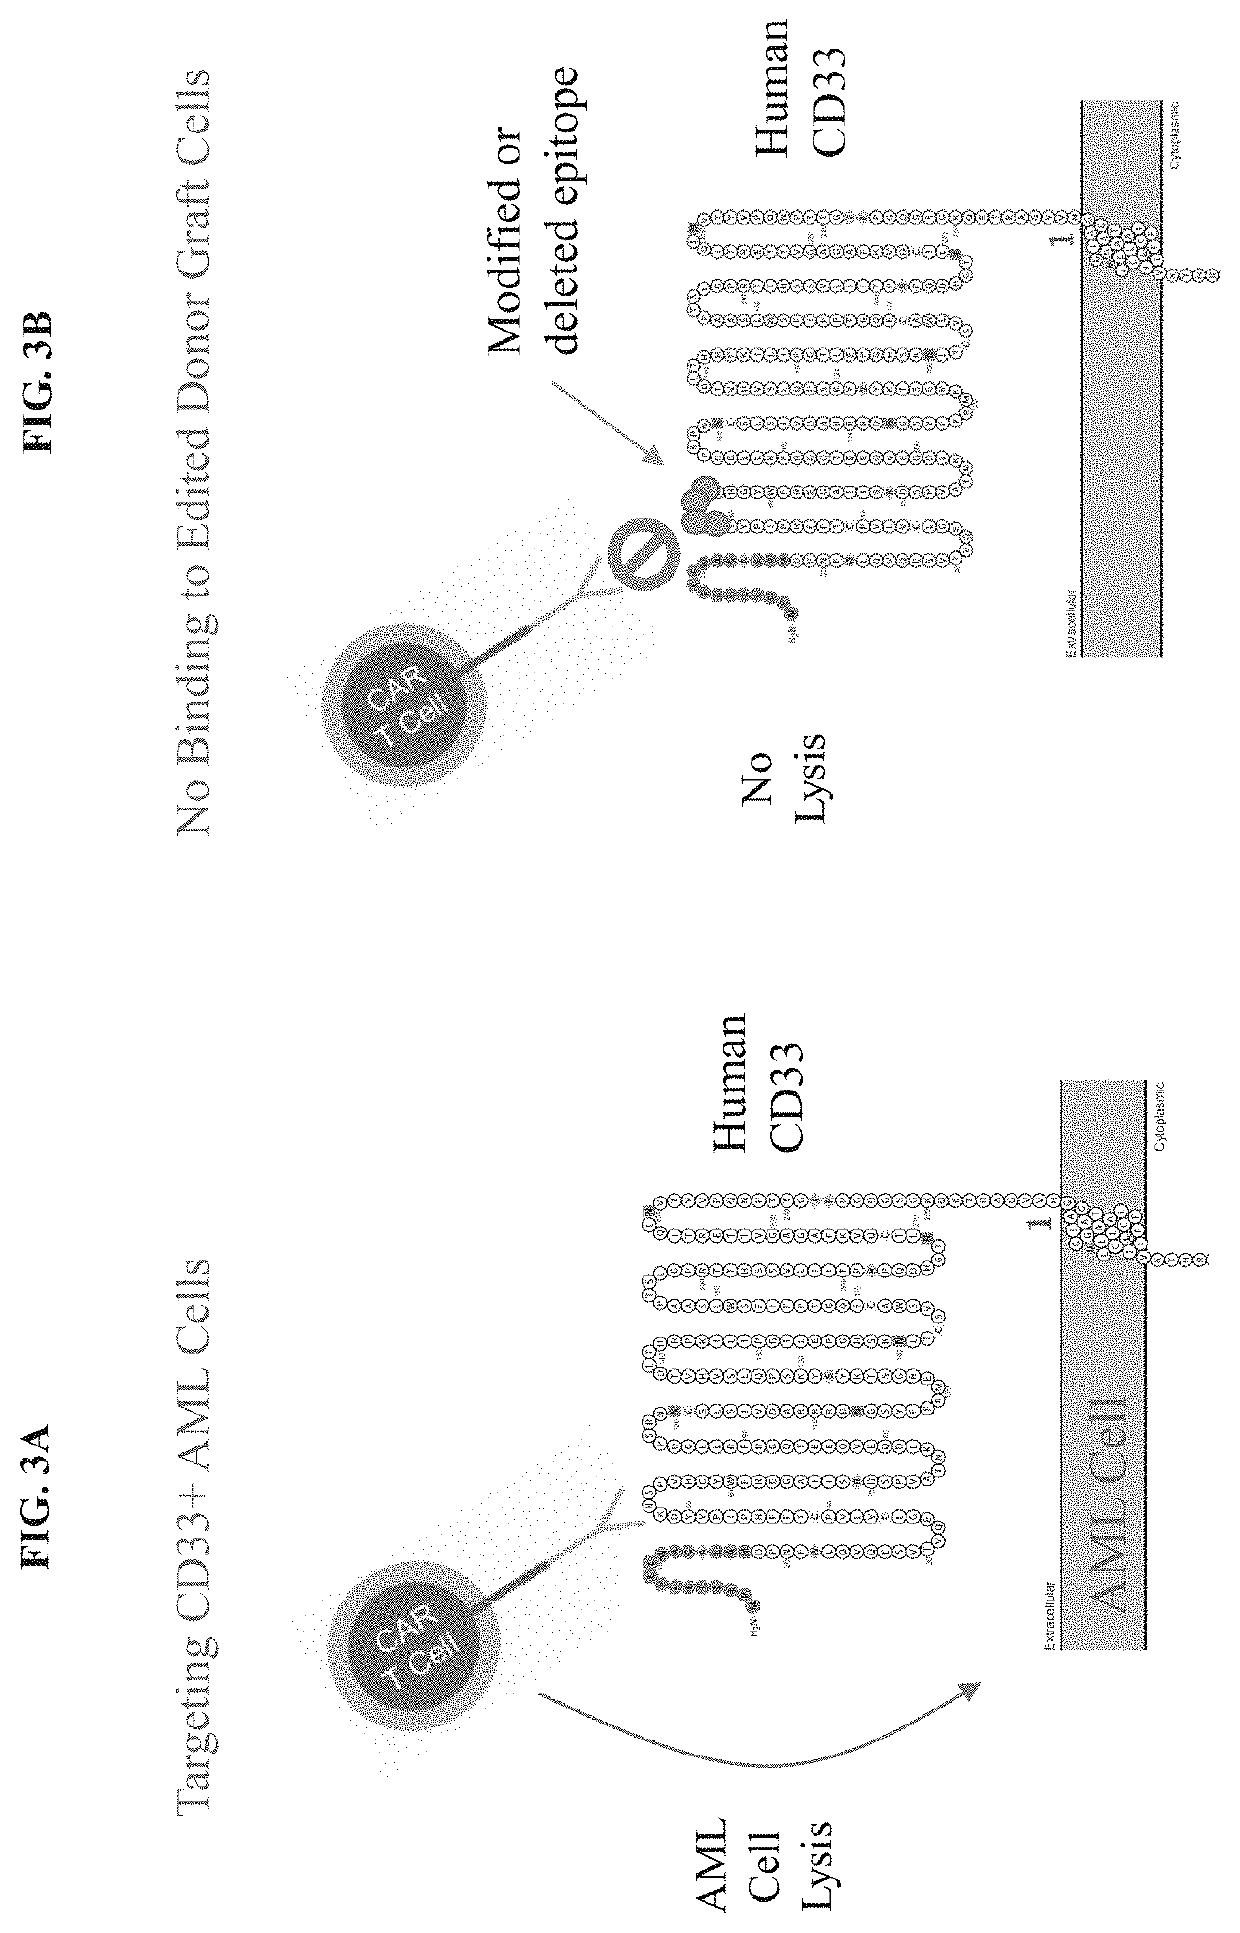 Genetically engineered hematopoietic stem cells and uses thereof